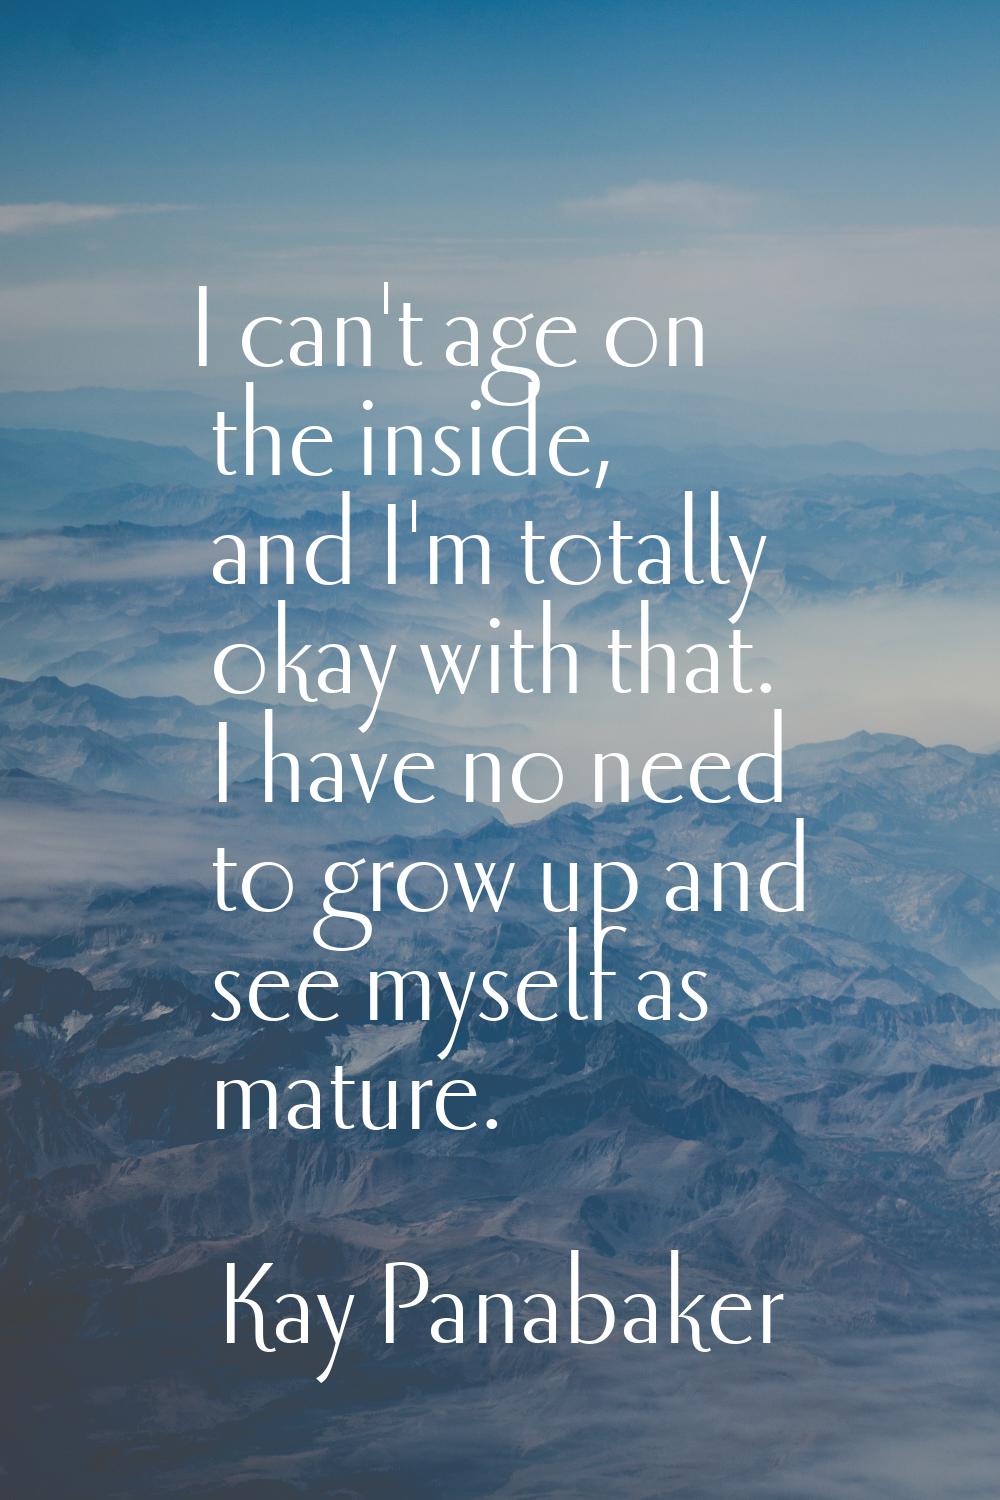 I can't age on the inside, and I'm totally okay with that. I have no need to grow up and see myself